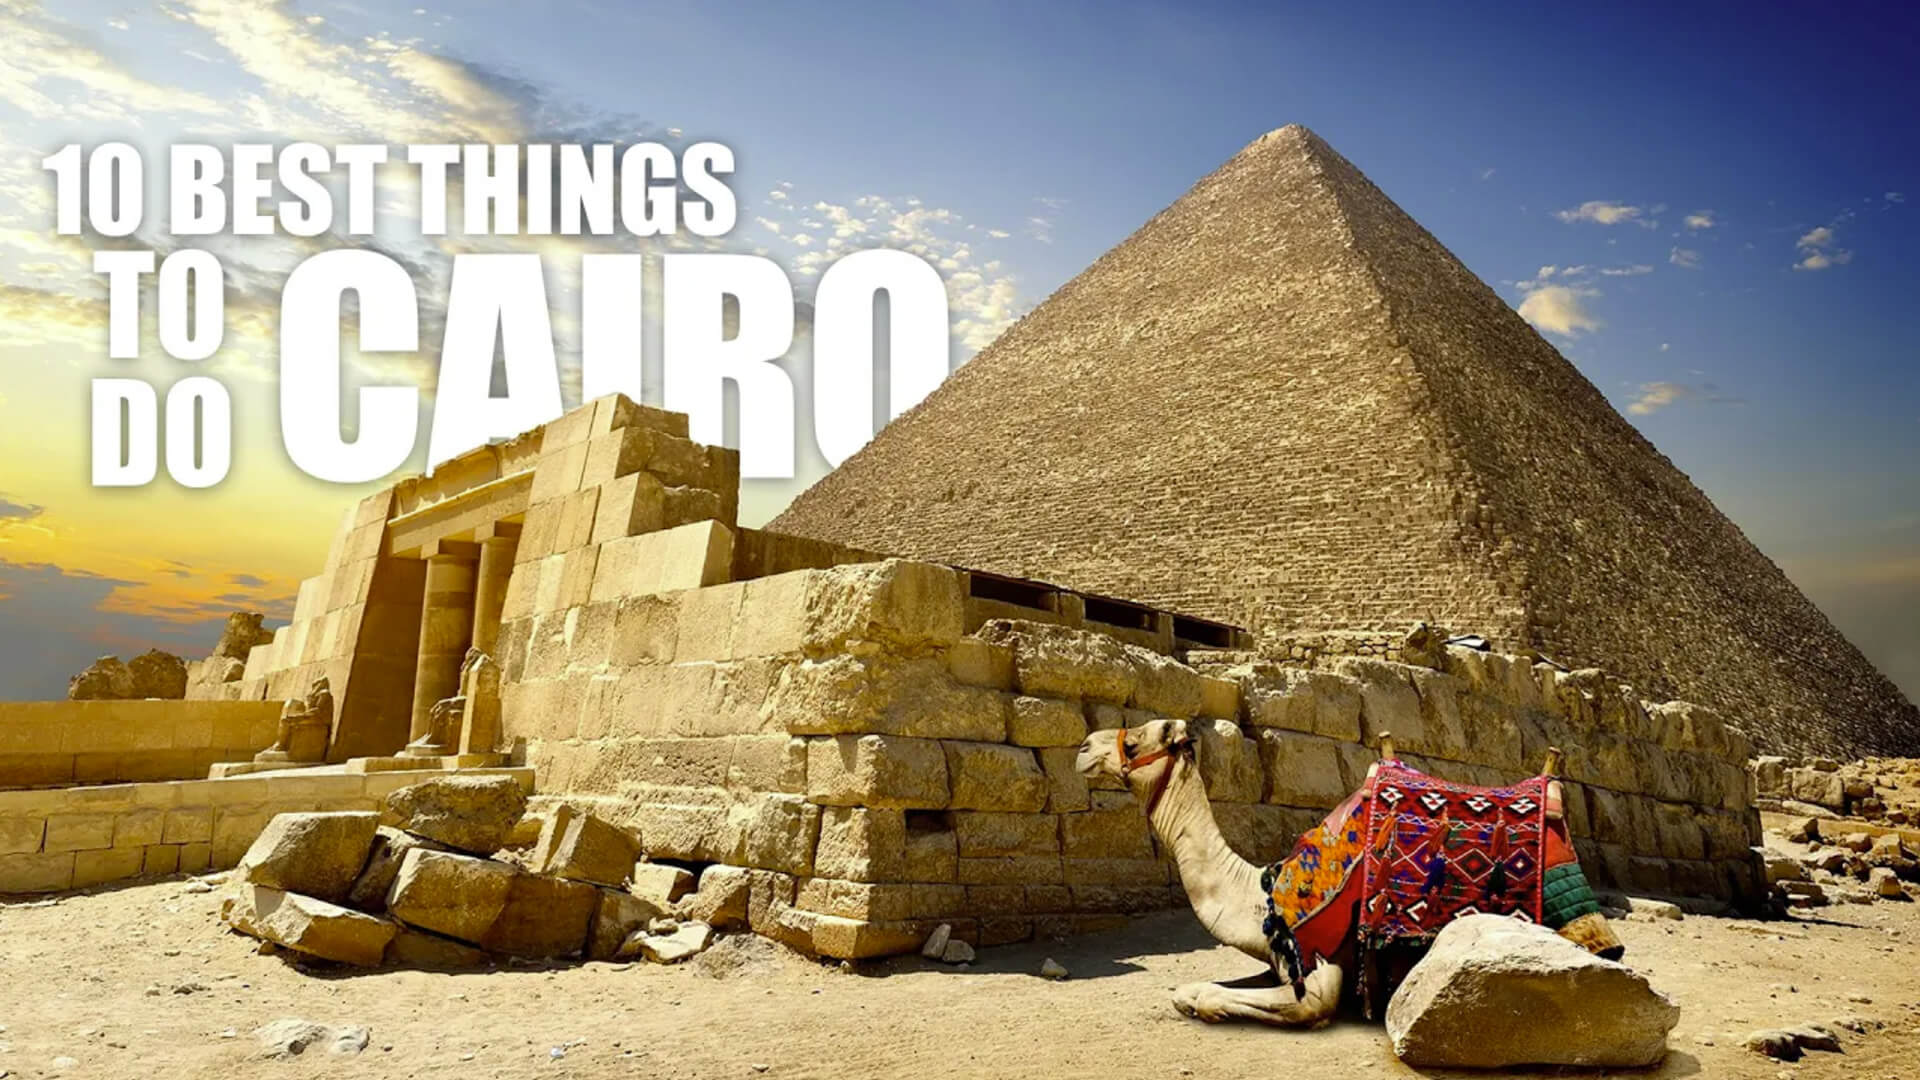 10 Best things to do in Cairo